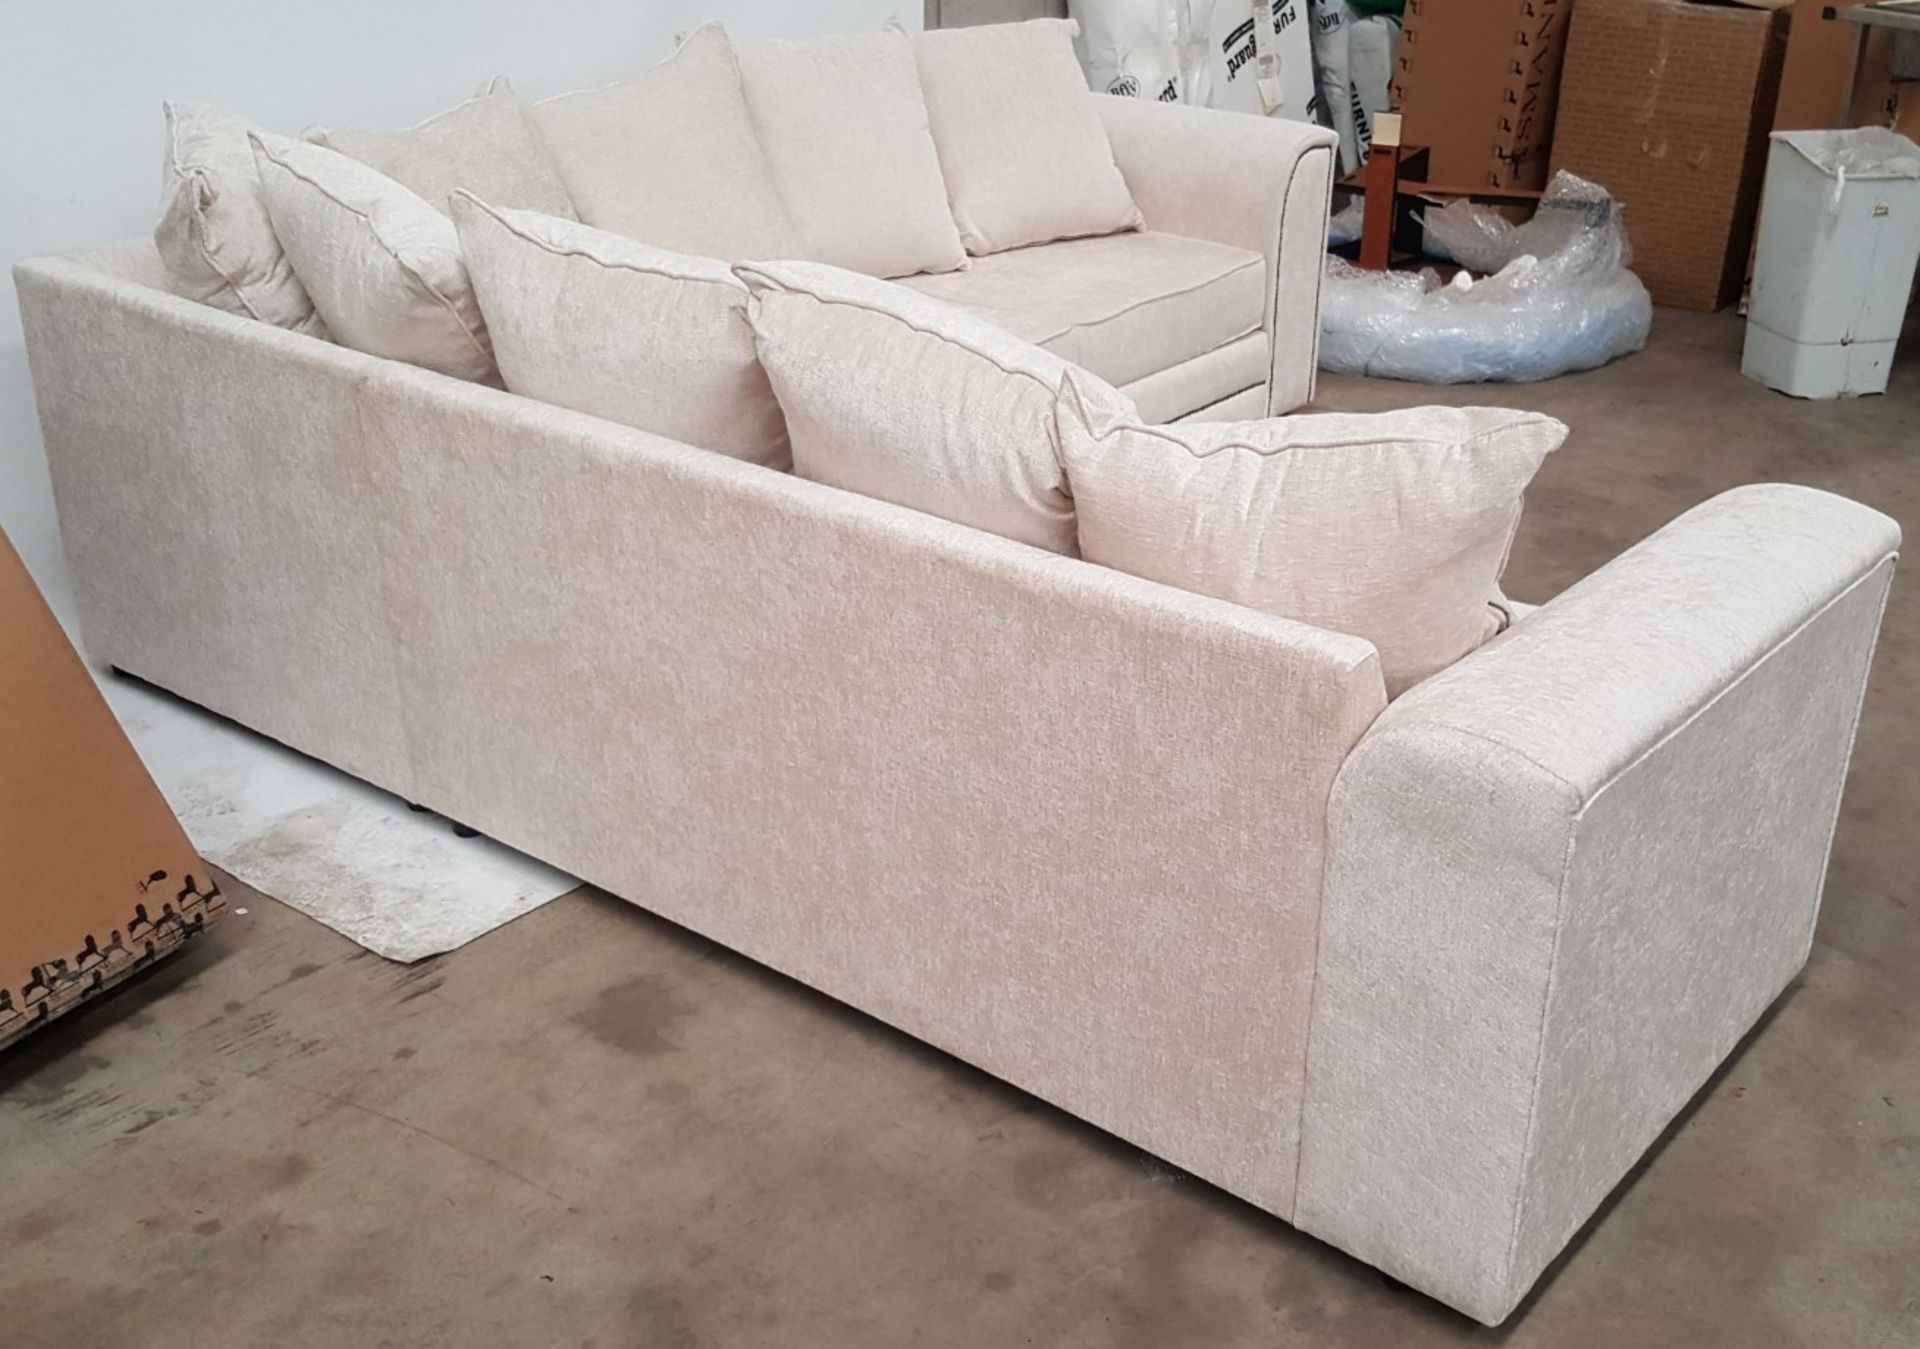 1 x Luxurious Pearl White Fabric L-Shaped Corner Seater Sofa - Ref BY198 - Image 4 of 7